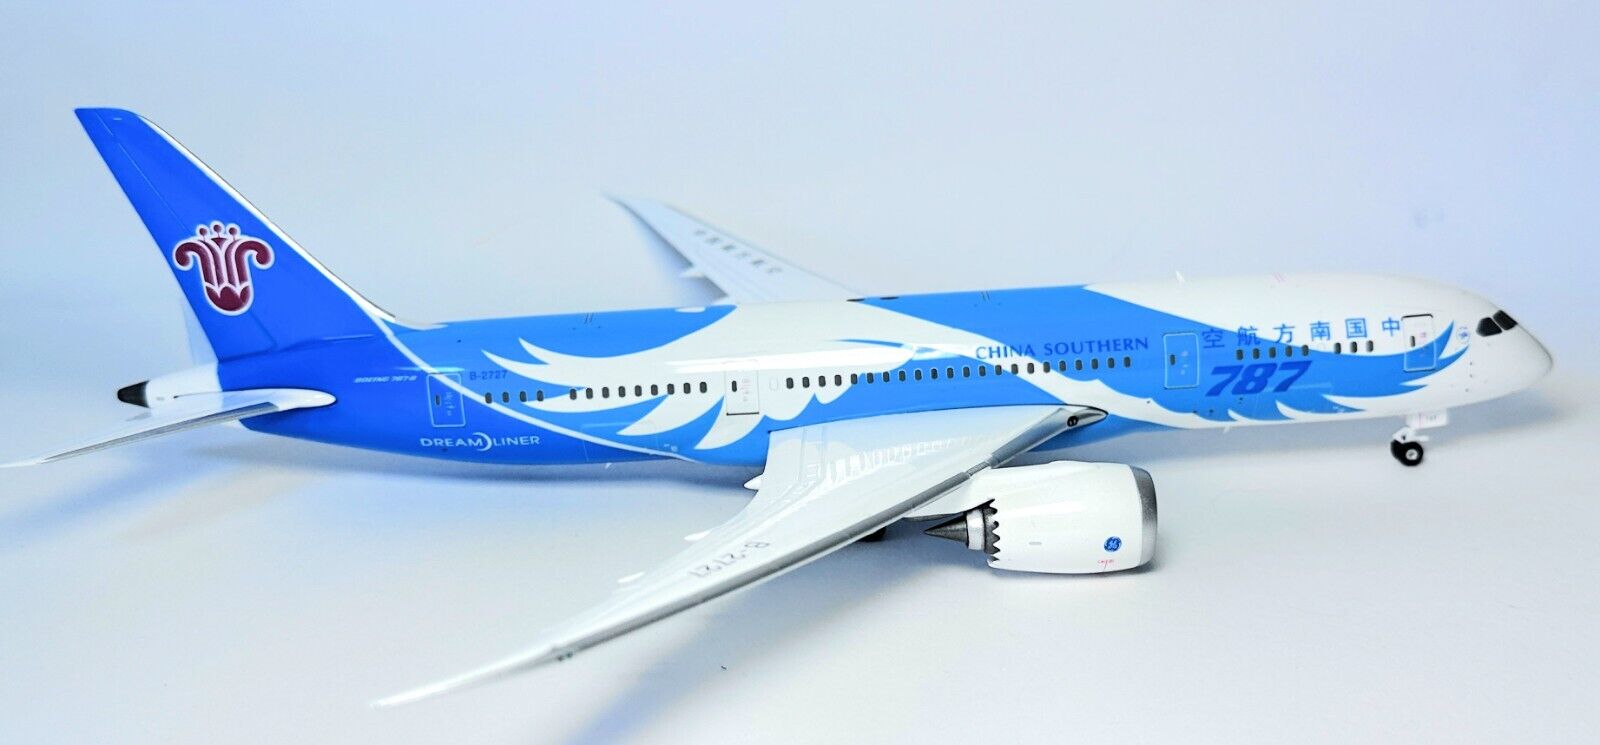 Boeing 787-8 China Southern Airlines Phoenix Diecast Model Scale 1:200